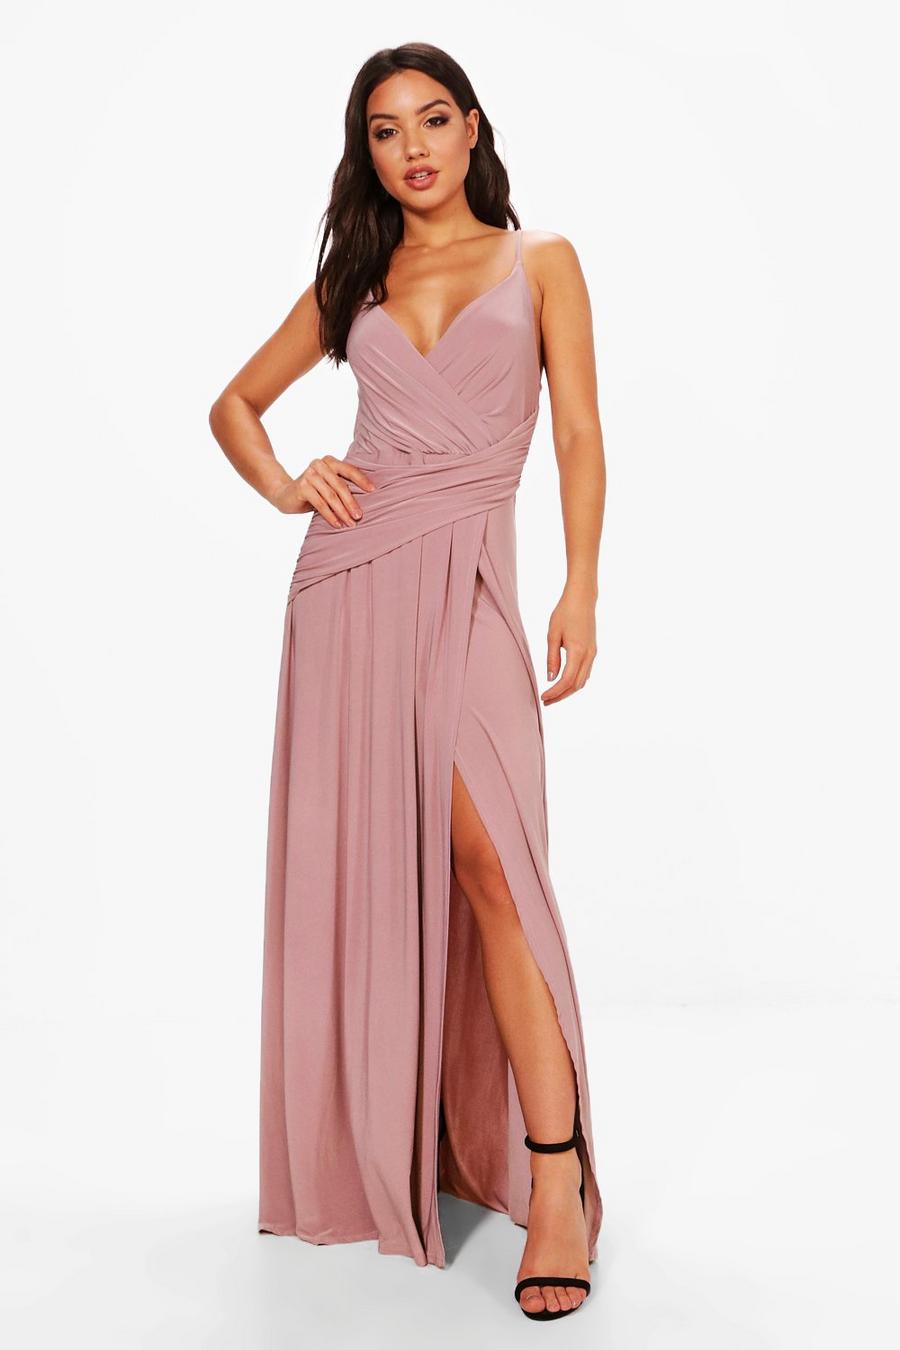 Mauve purple Slinky Wrap Ruched Strappy Maxi Bridesmaid Dress